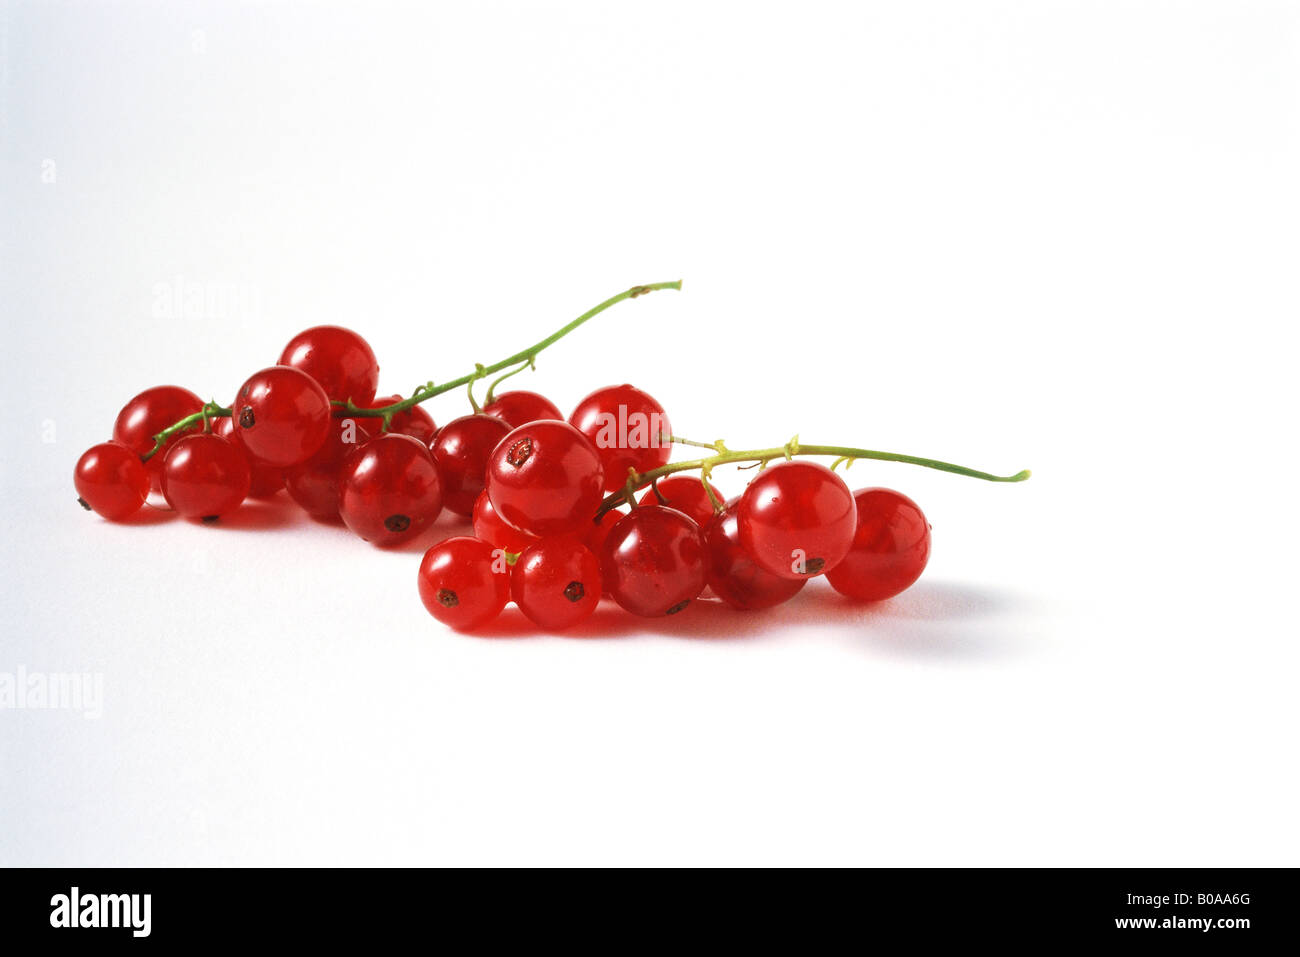 Red currants, close-up Stock Photo